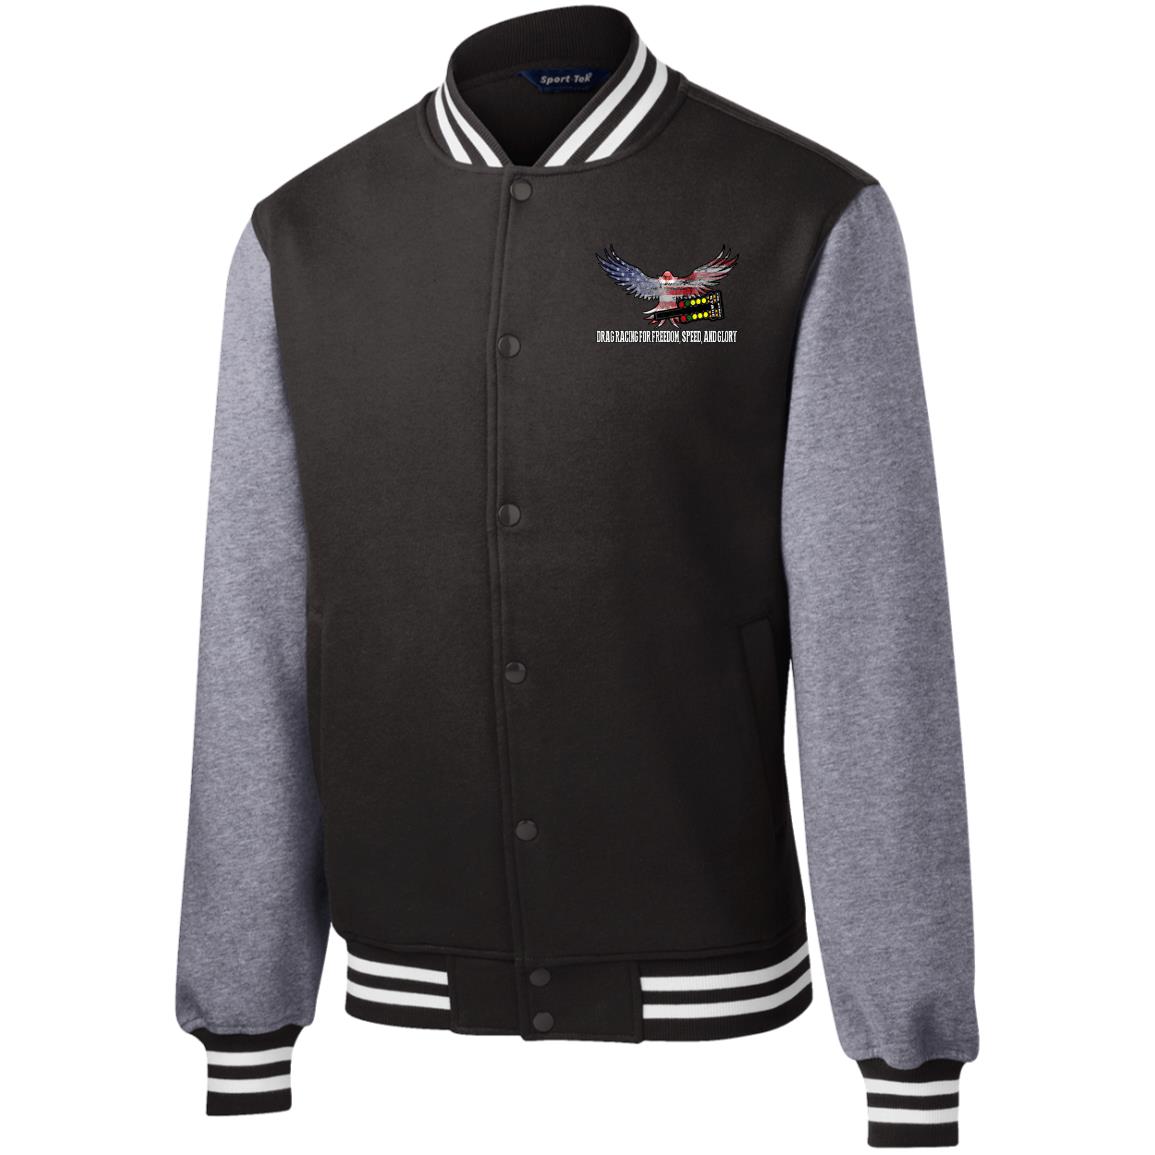 Drag Racing for Freedom, Speed, and Glory Fleece Letterman Jacket